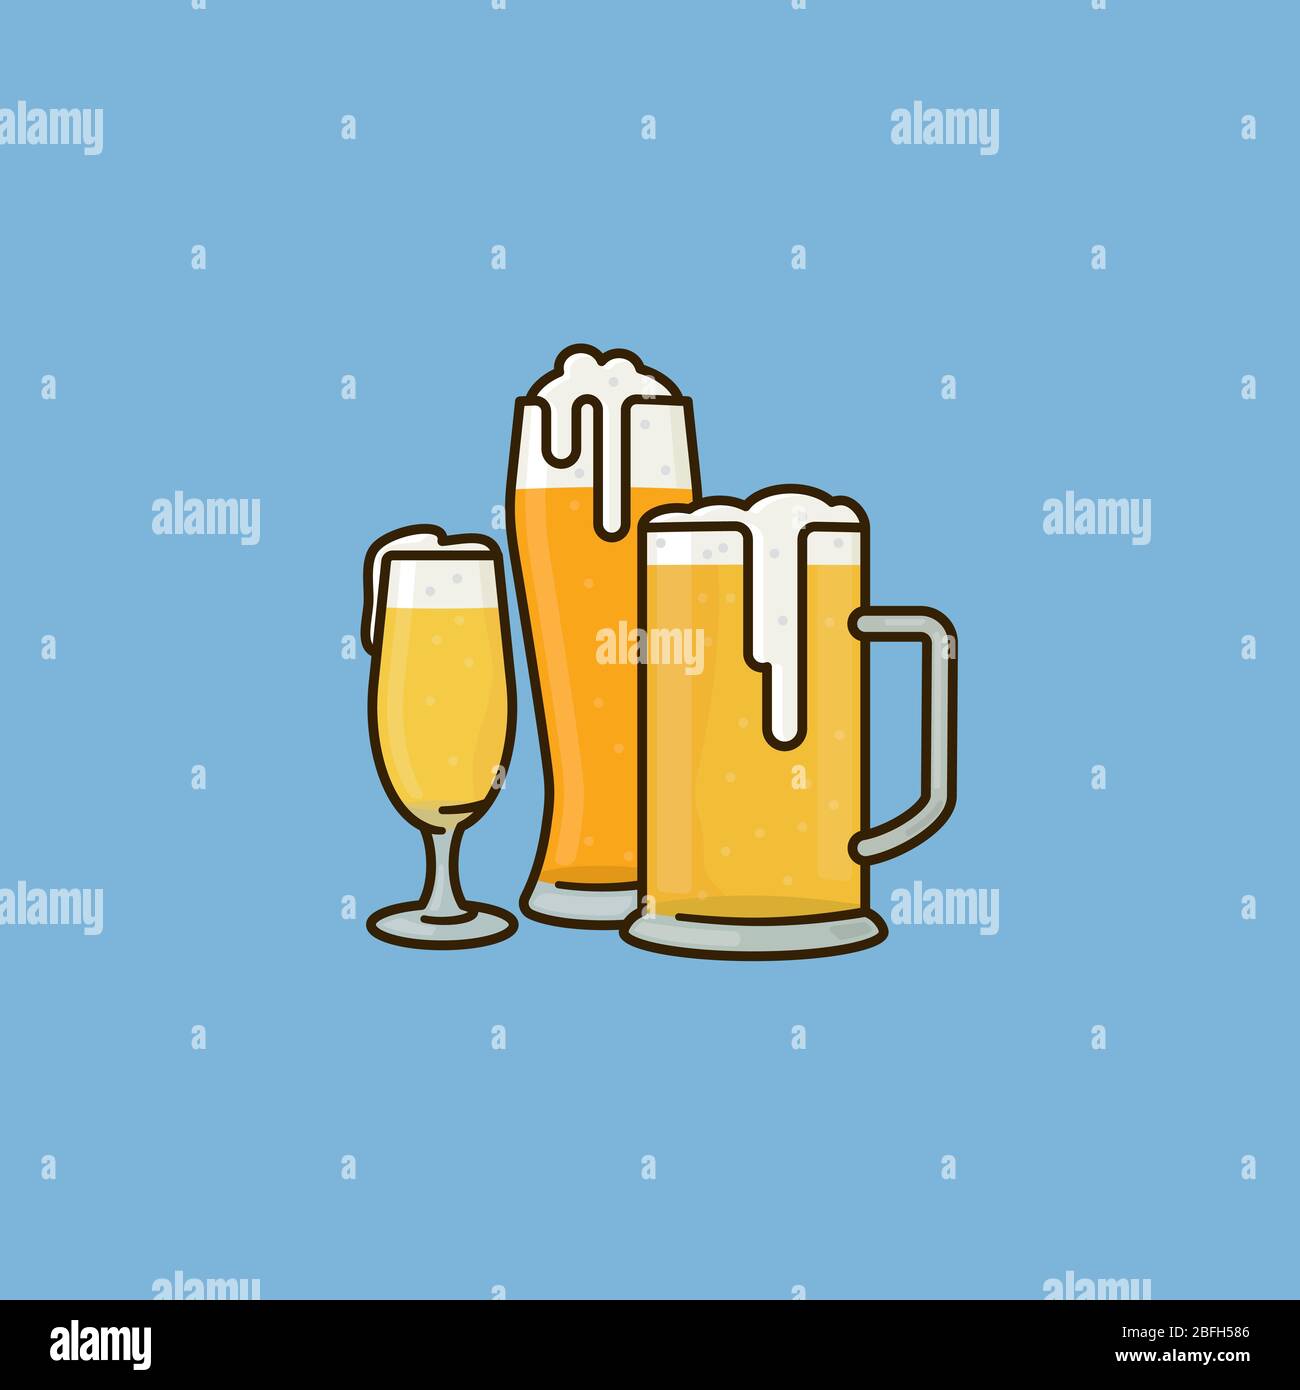 Variety of beer glasses vector illustration for German Beer Day on April 23rd. Traditionally brewed alcoholic beverages symbol. Stock Vector